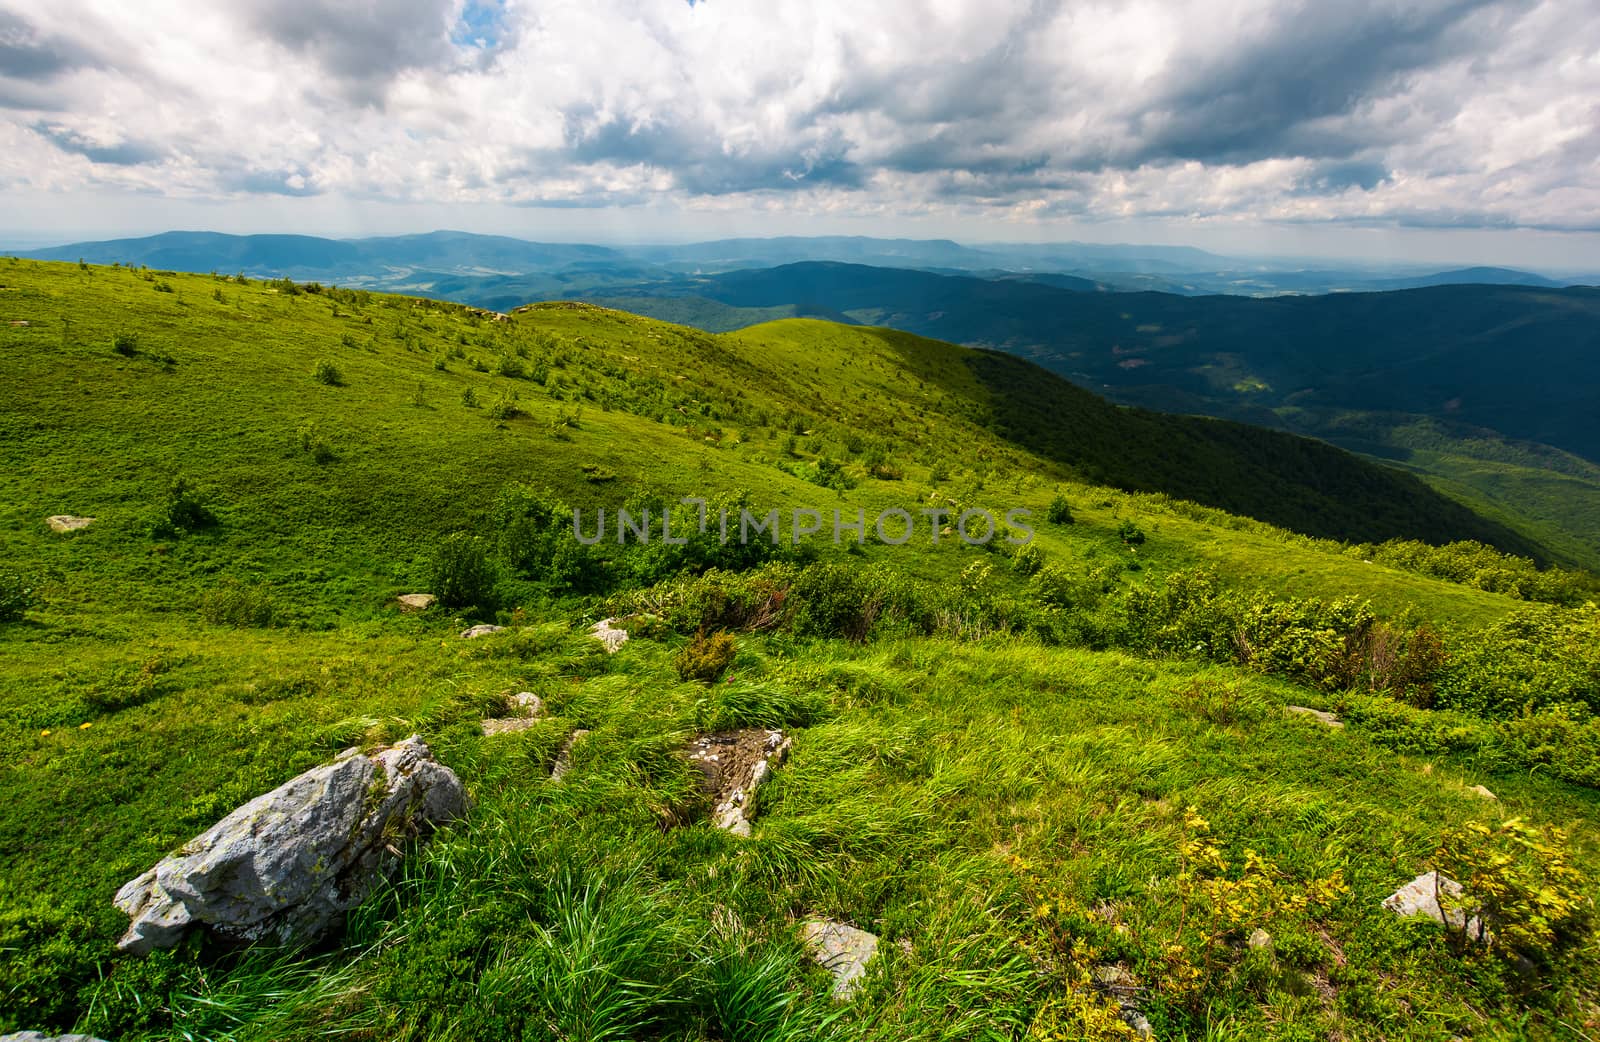 grassy slope of the mountain on a cloudy day. beautiful summer landscape of Carpathian mountains